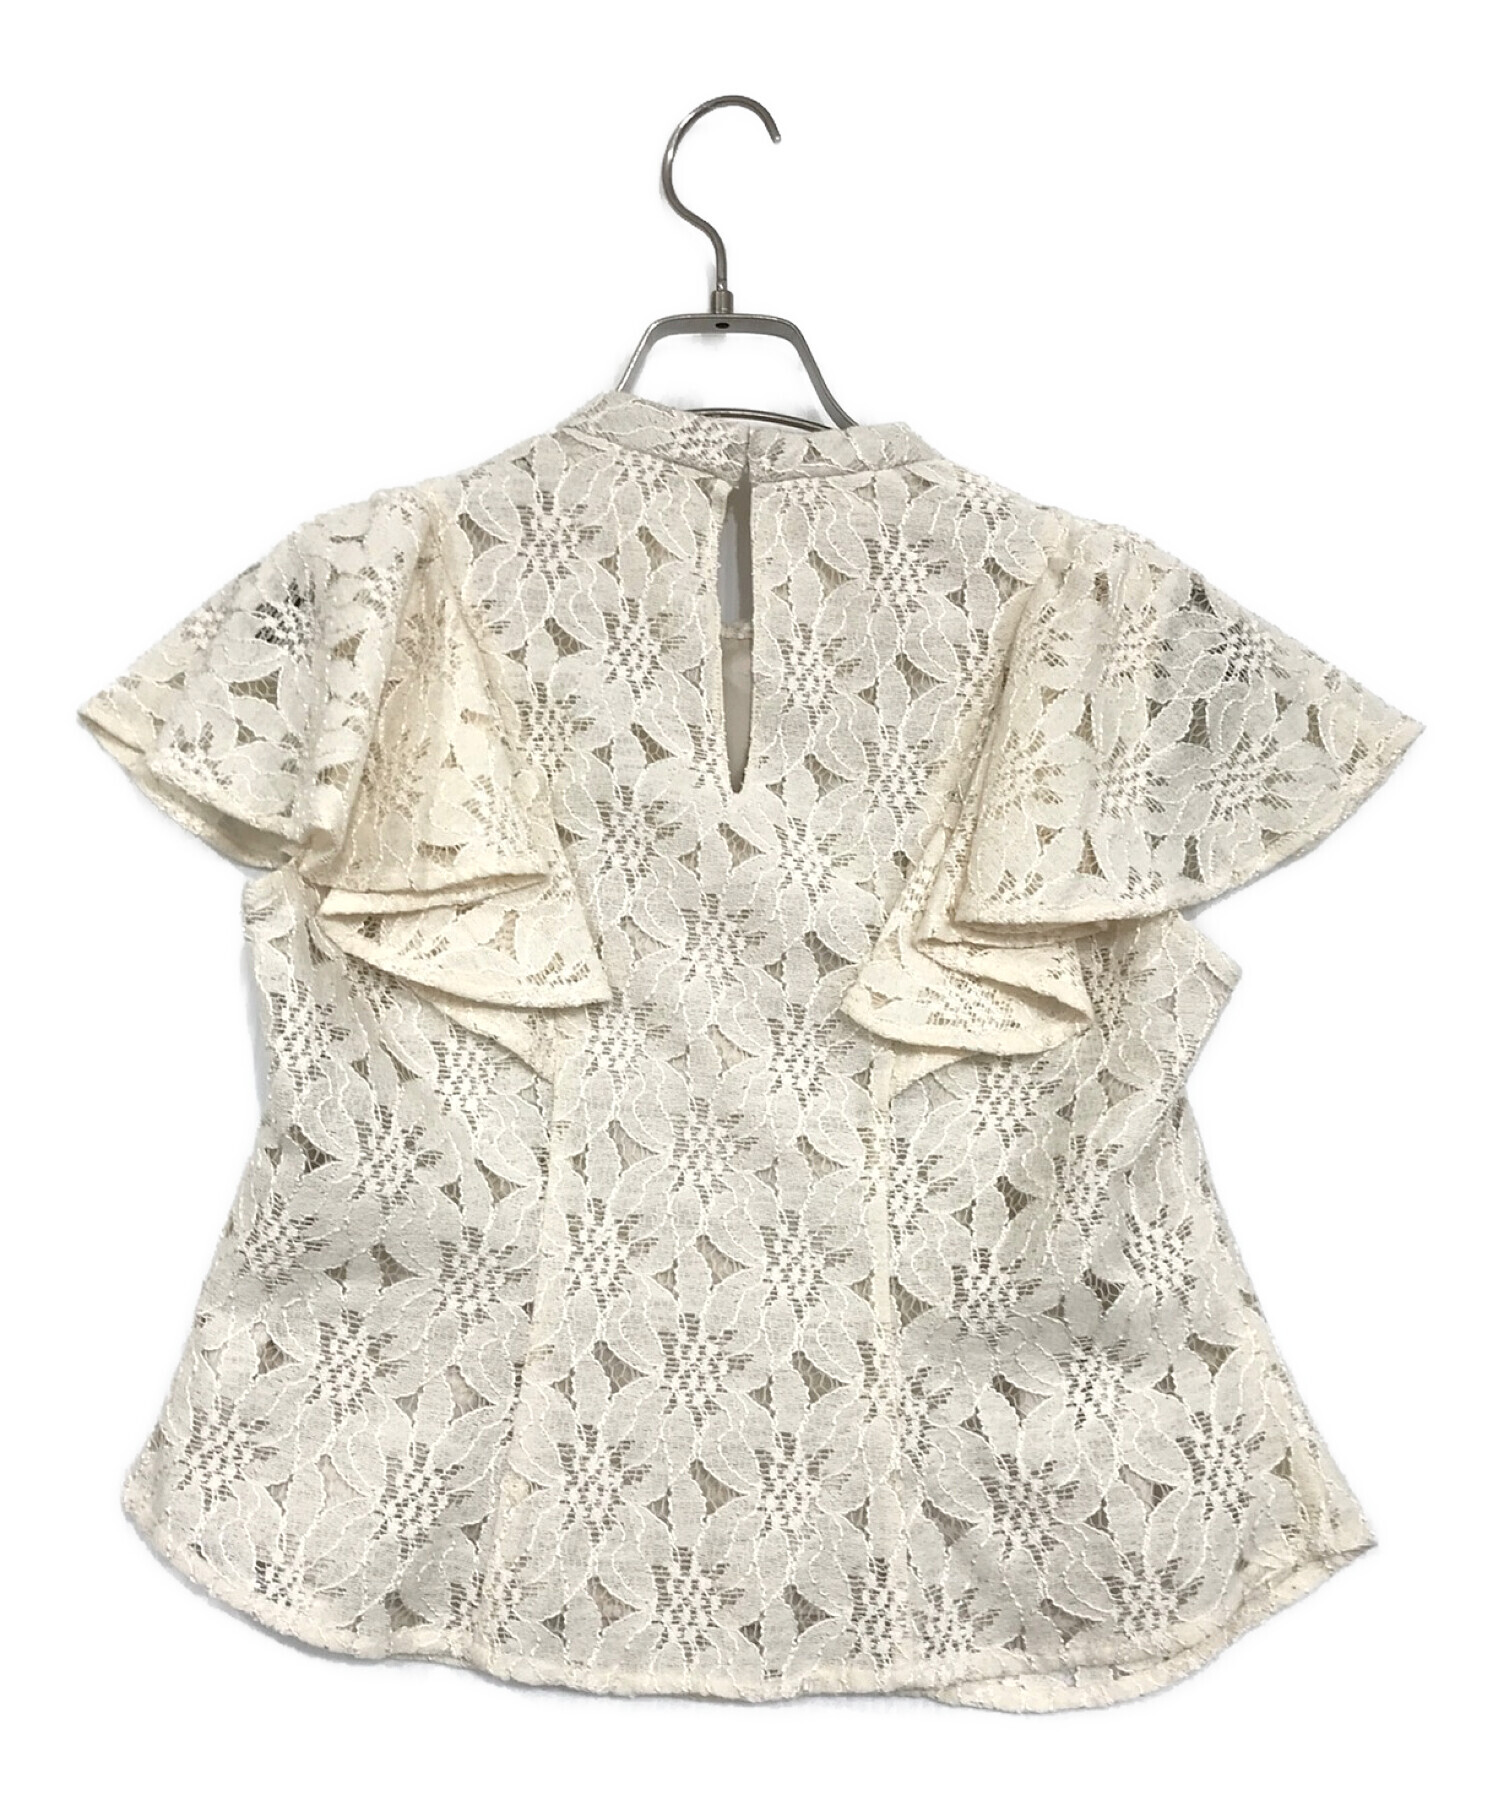 Floral Lace Ruffled Top  Sサイズ